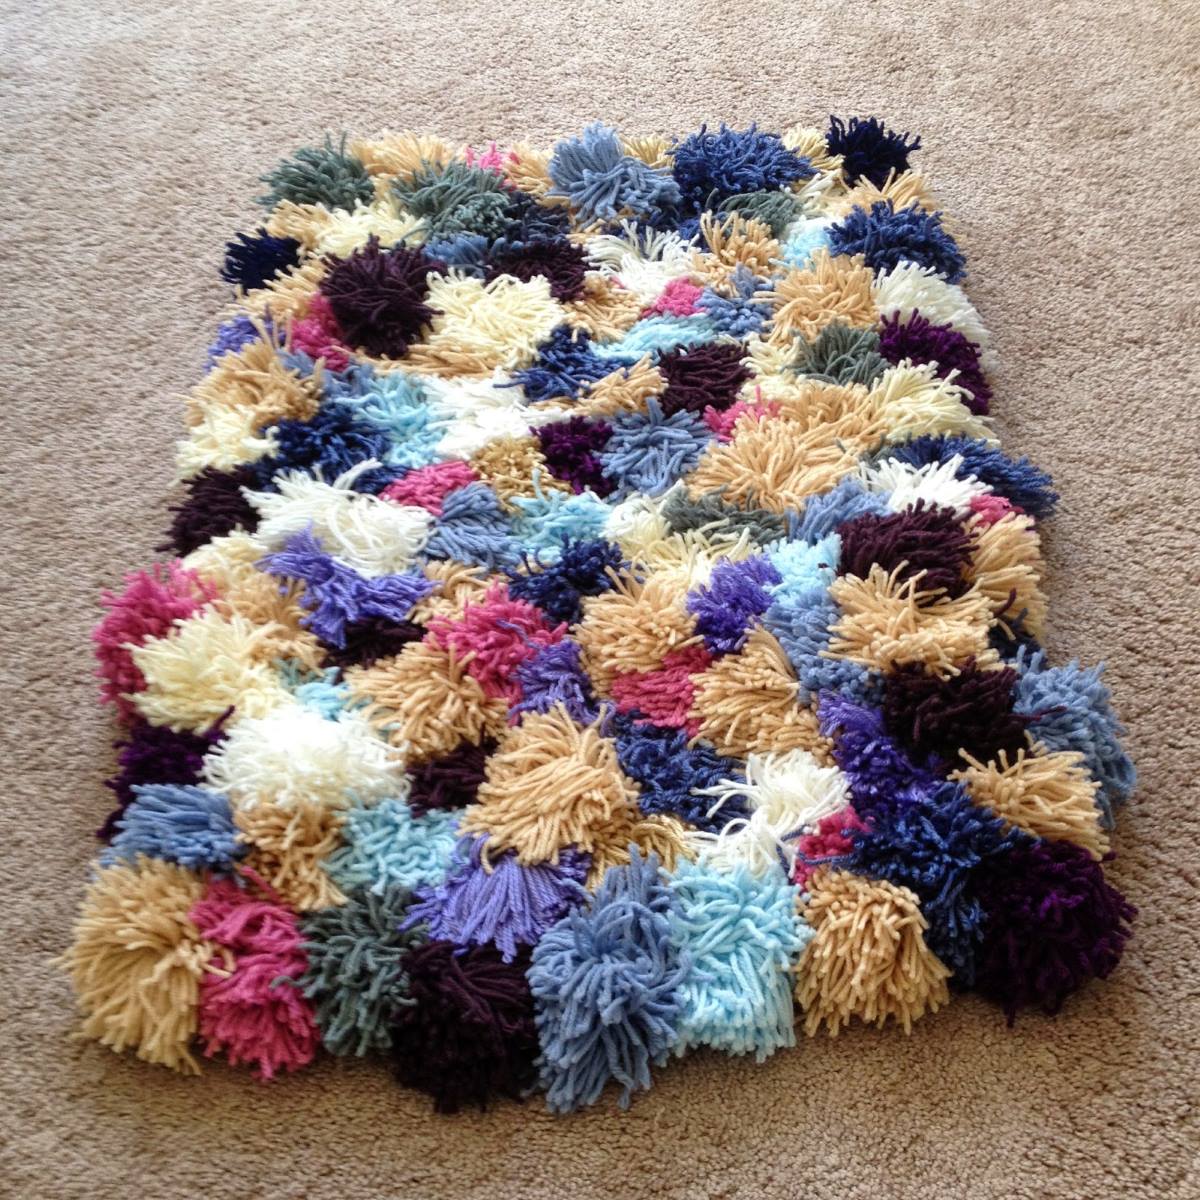 How To Make Yarn Rugs | Storables